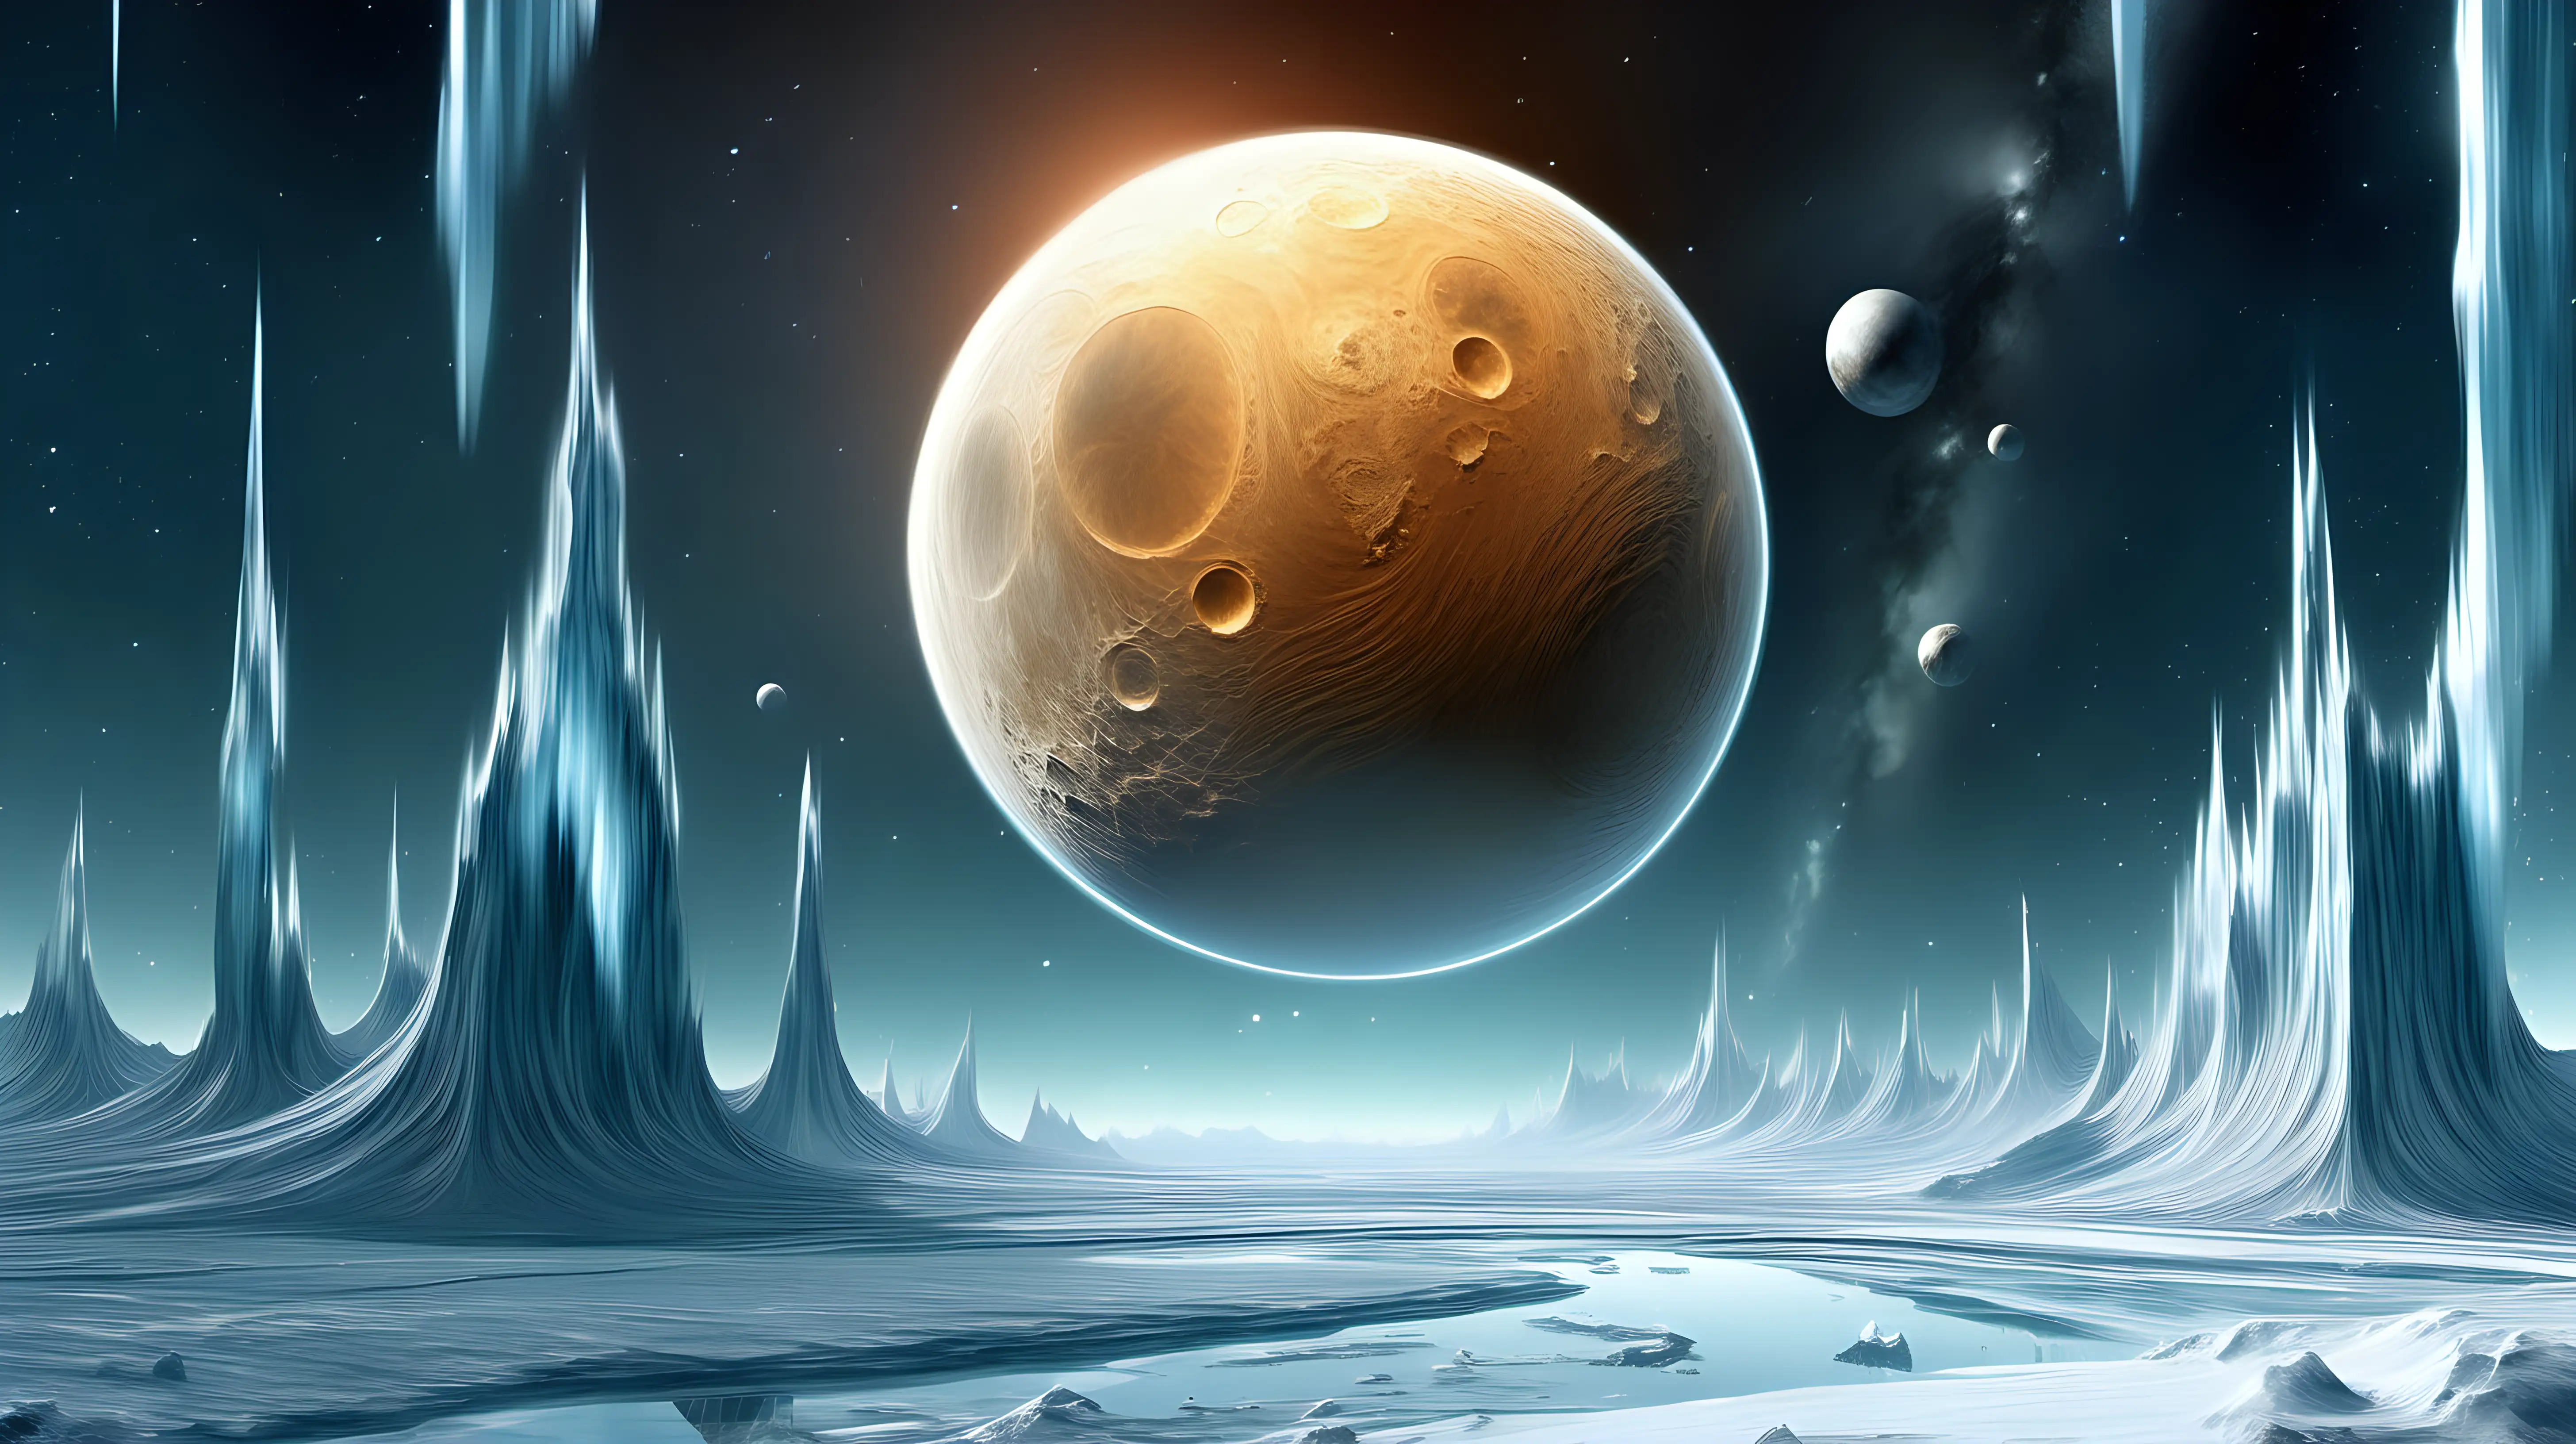 Illustrate an ice-covered moon orbiting a gas giant, showcasing the delicate dance of icy geysers erupting into space against the backdrop of the distant planet
